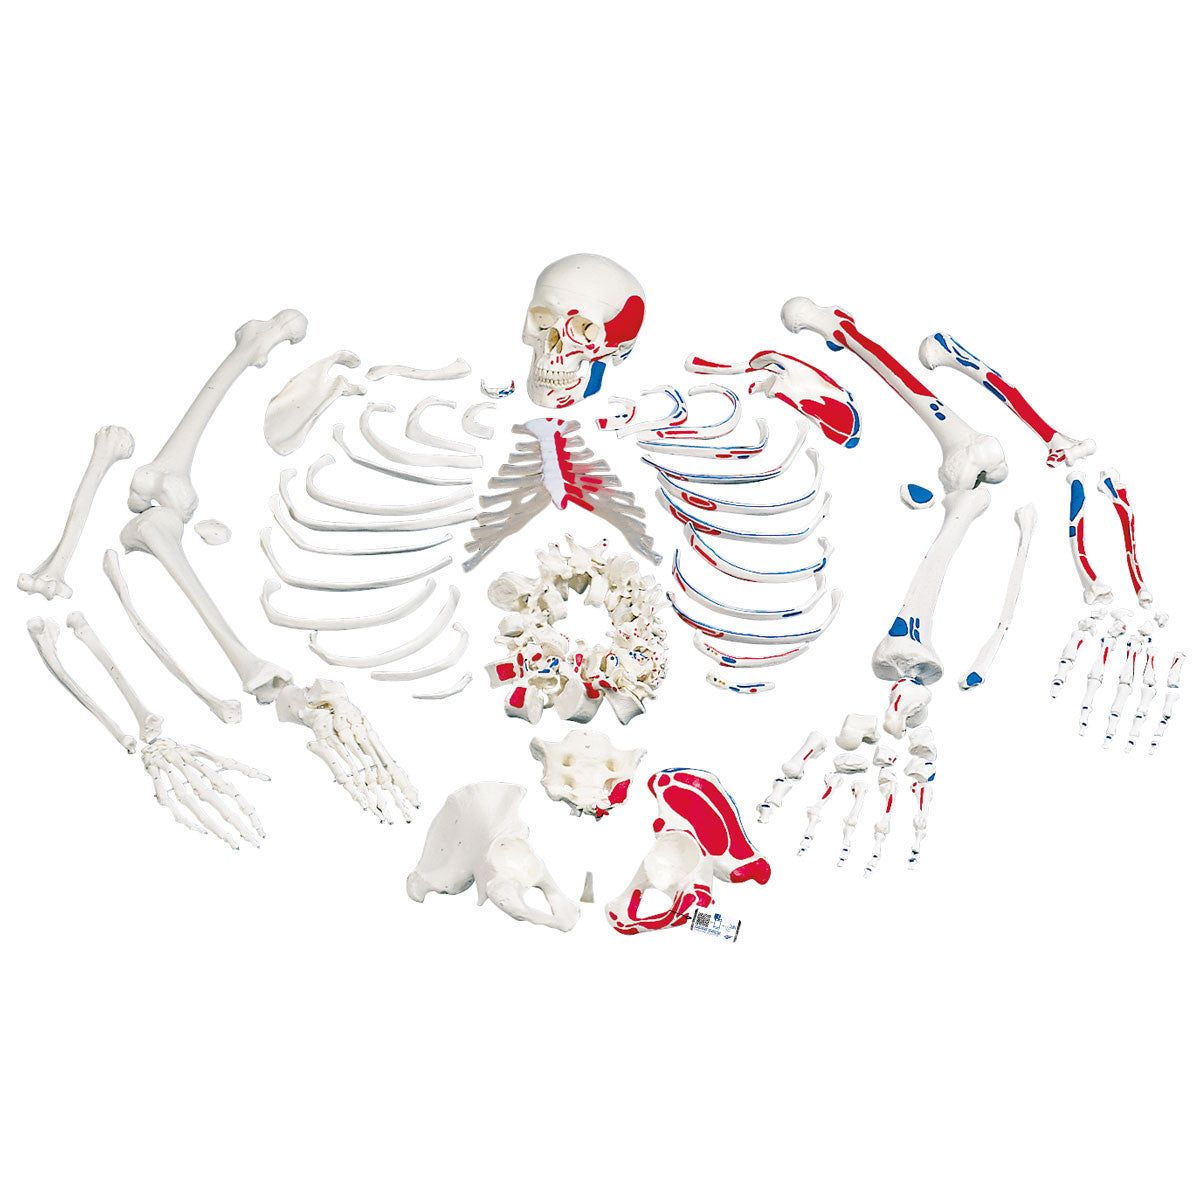 Disarticulated Human Skeleton Model with Painted Muscles, Complete with 3-part Skull | 3B Scientific A05/1 | Candent